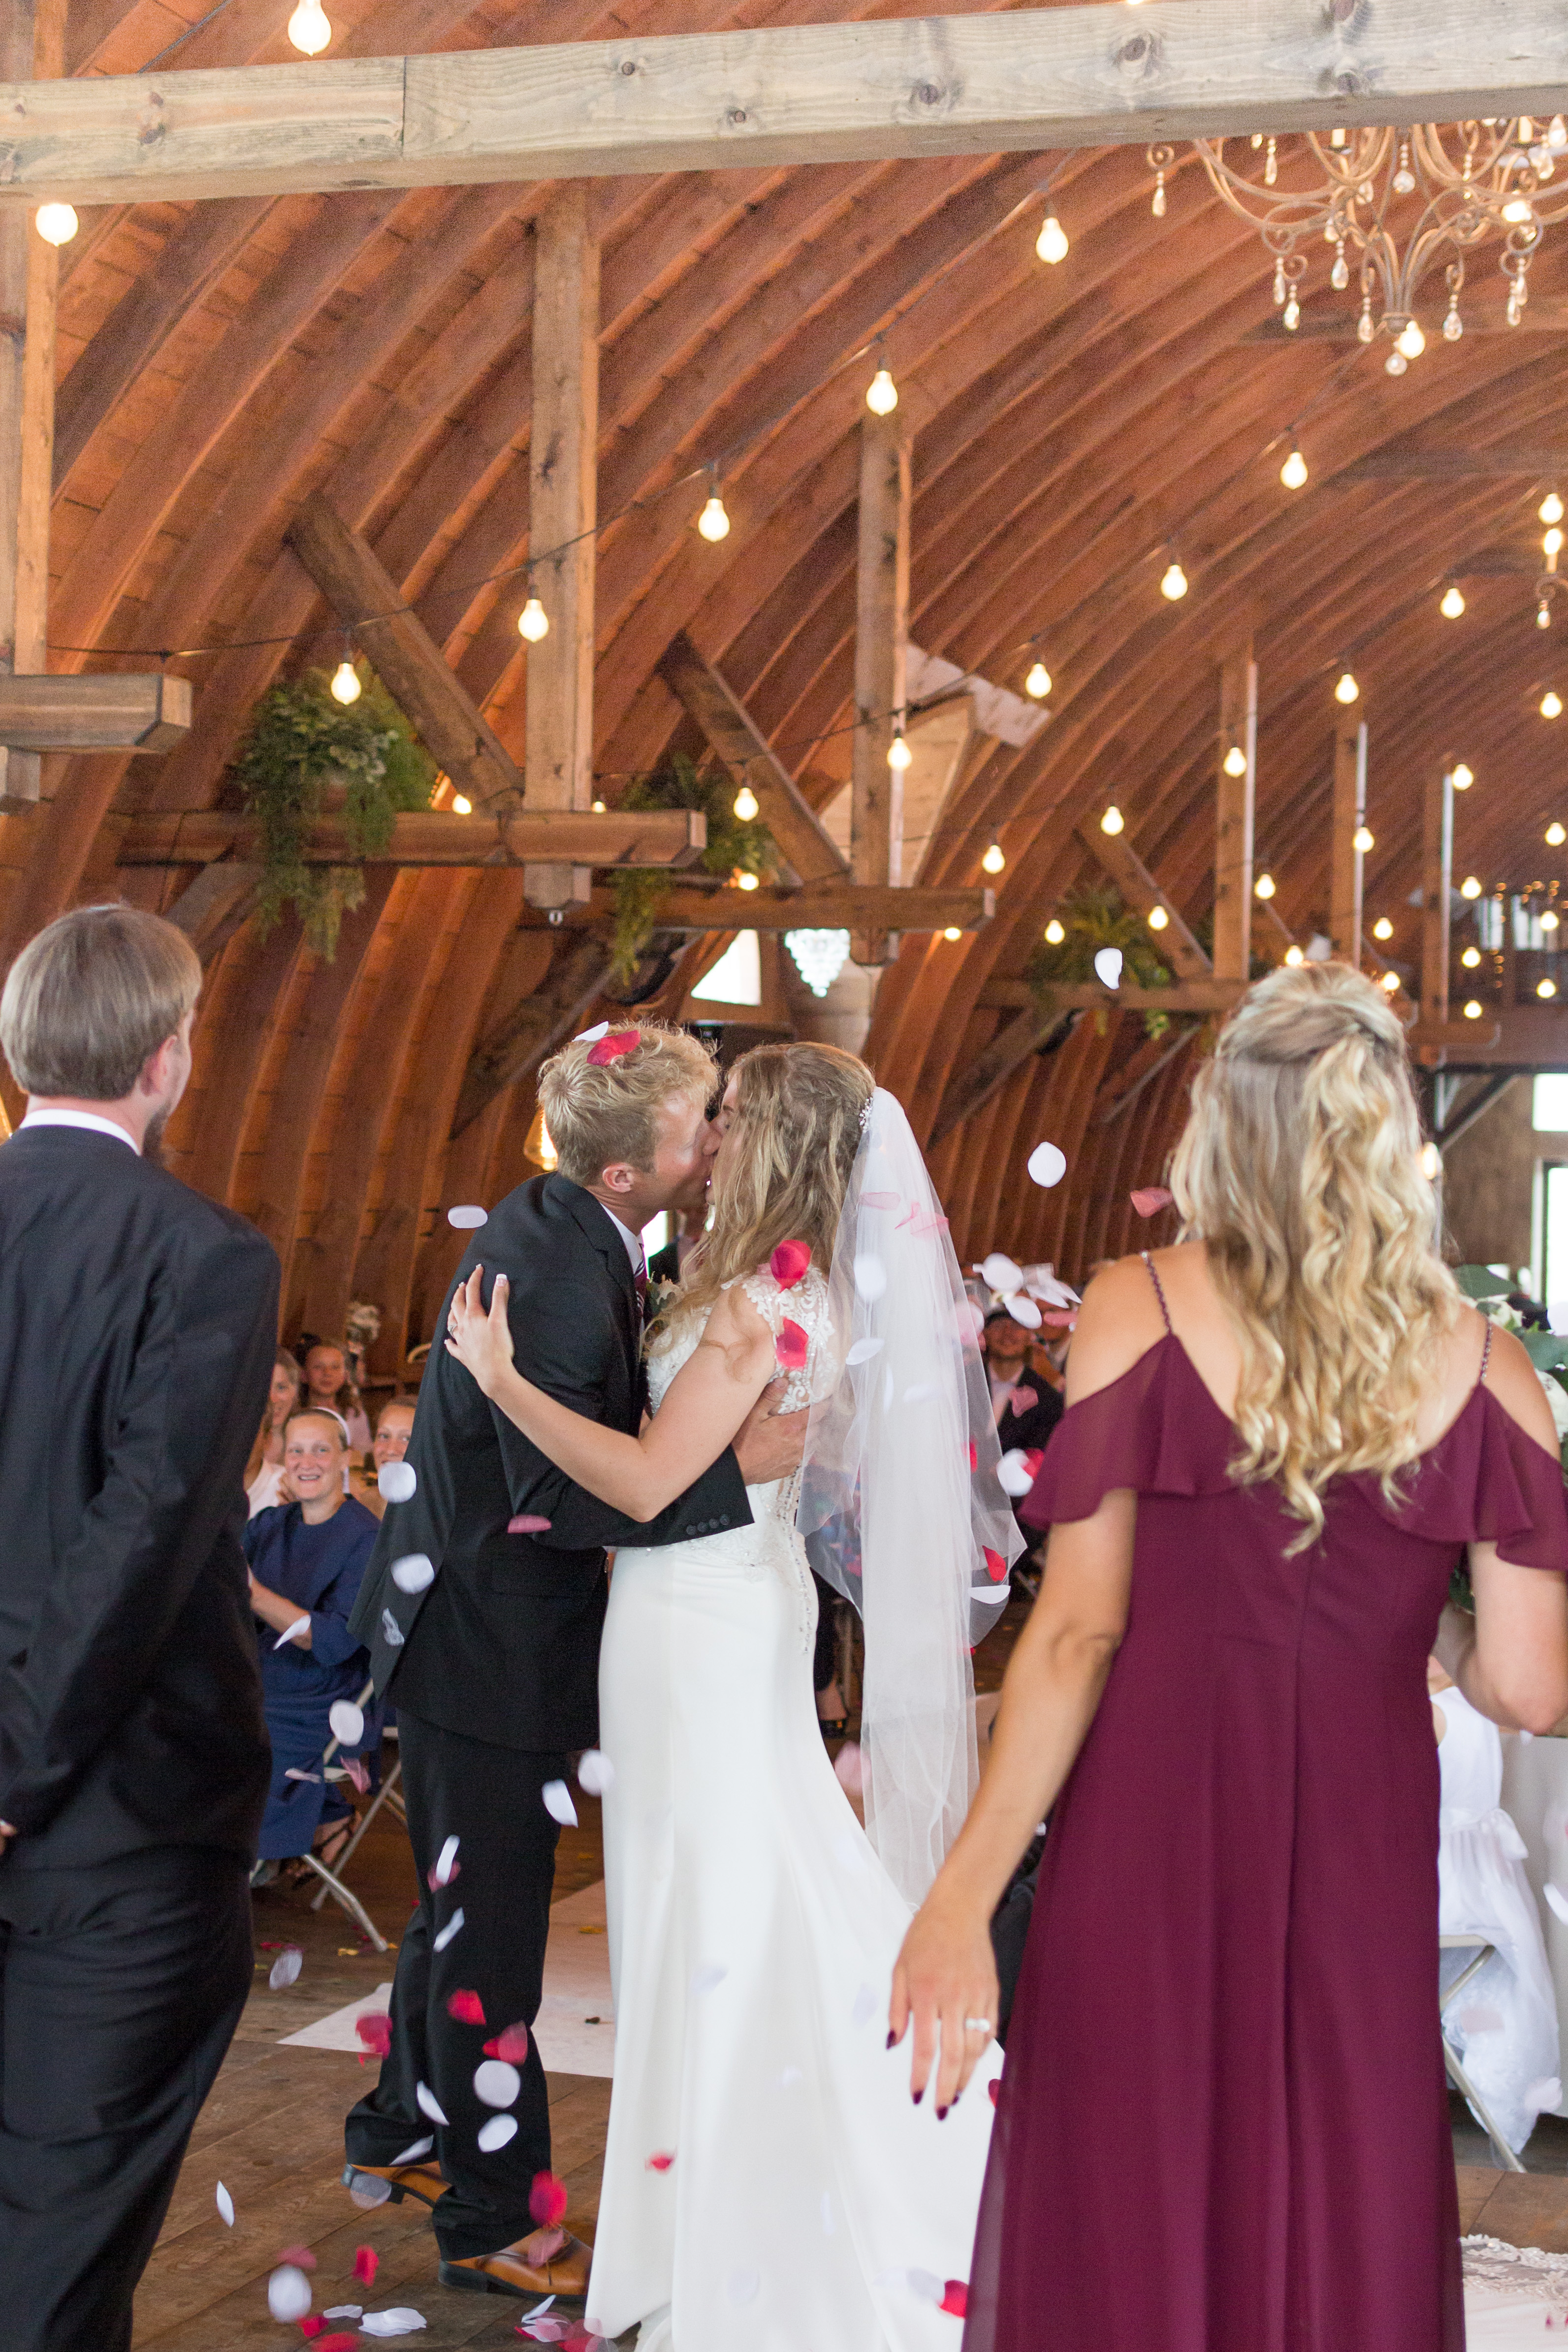 First Kiss Wedding at The Barn on Stoney Hill - Karen Elise Photography